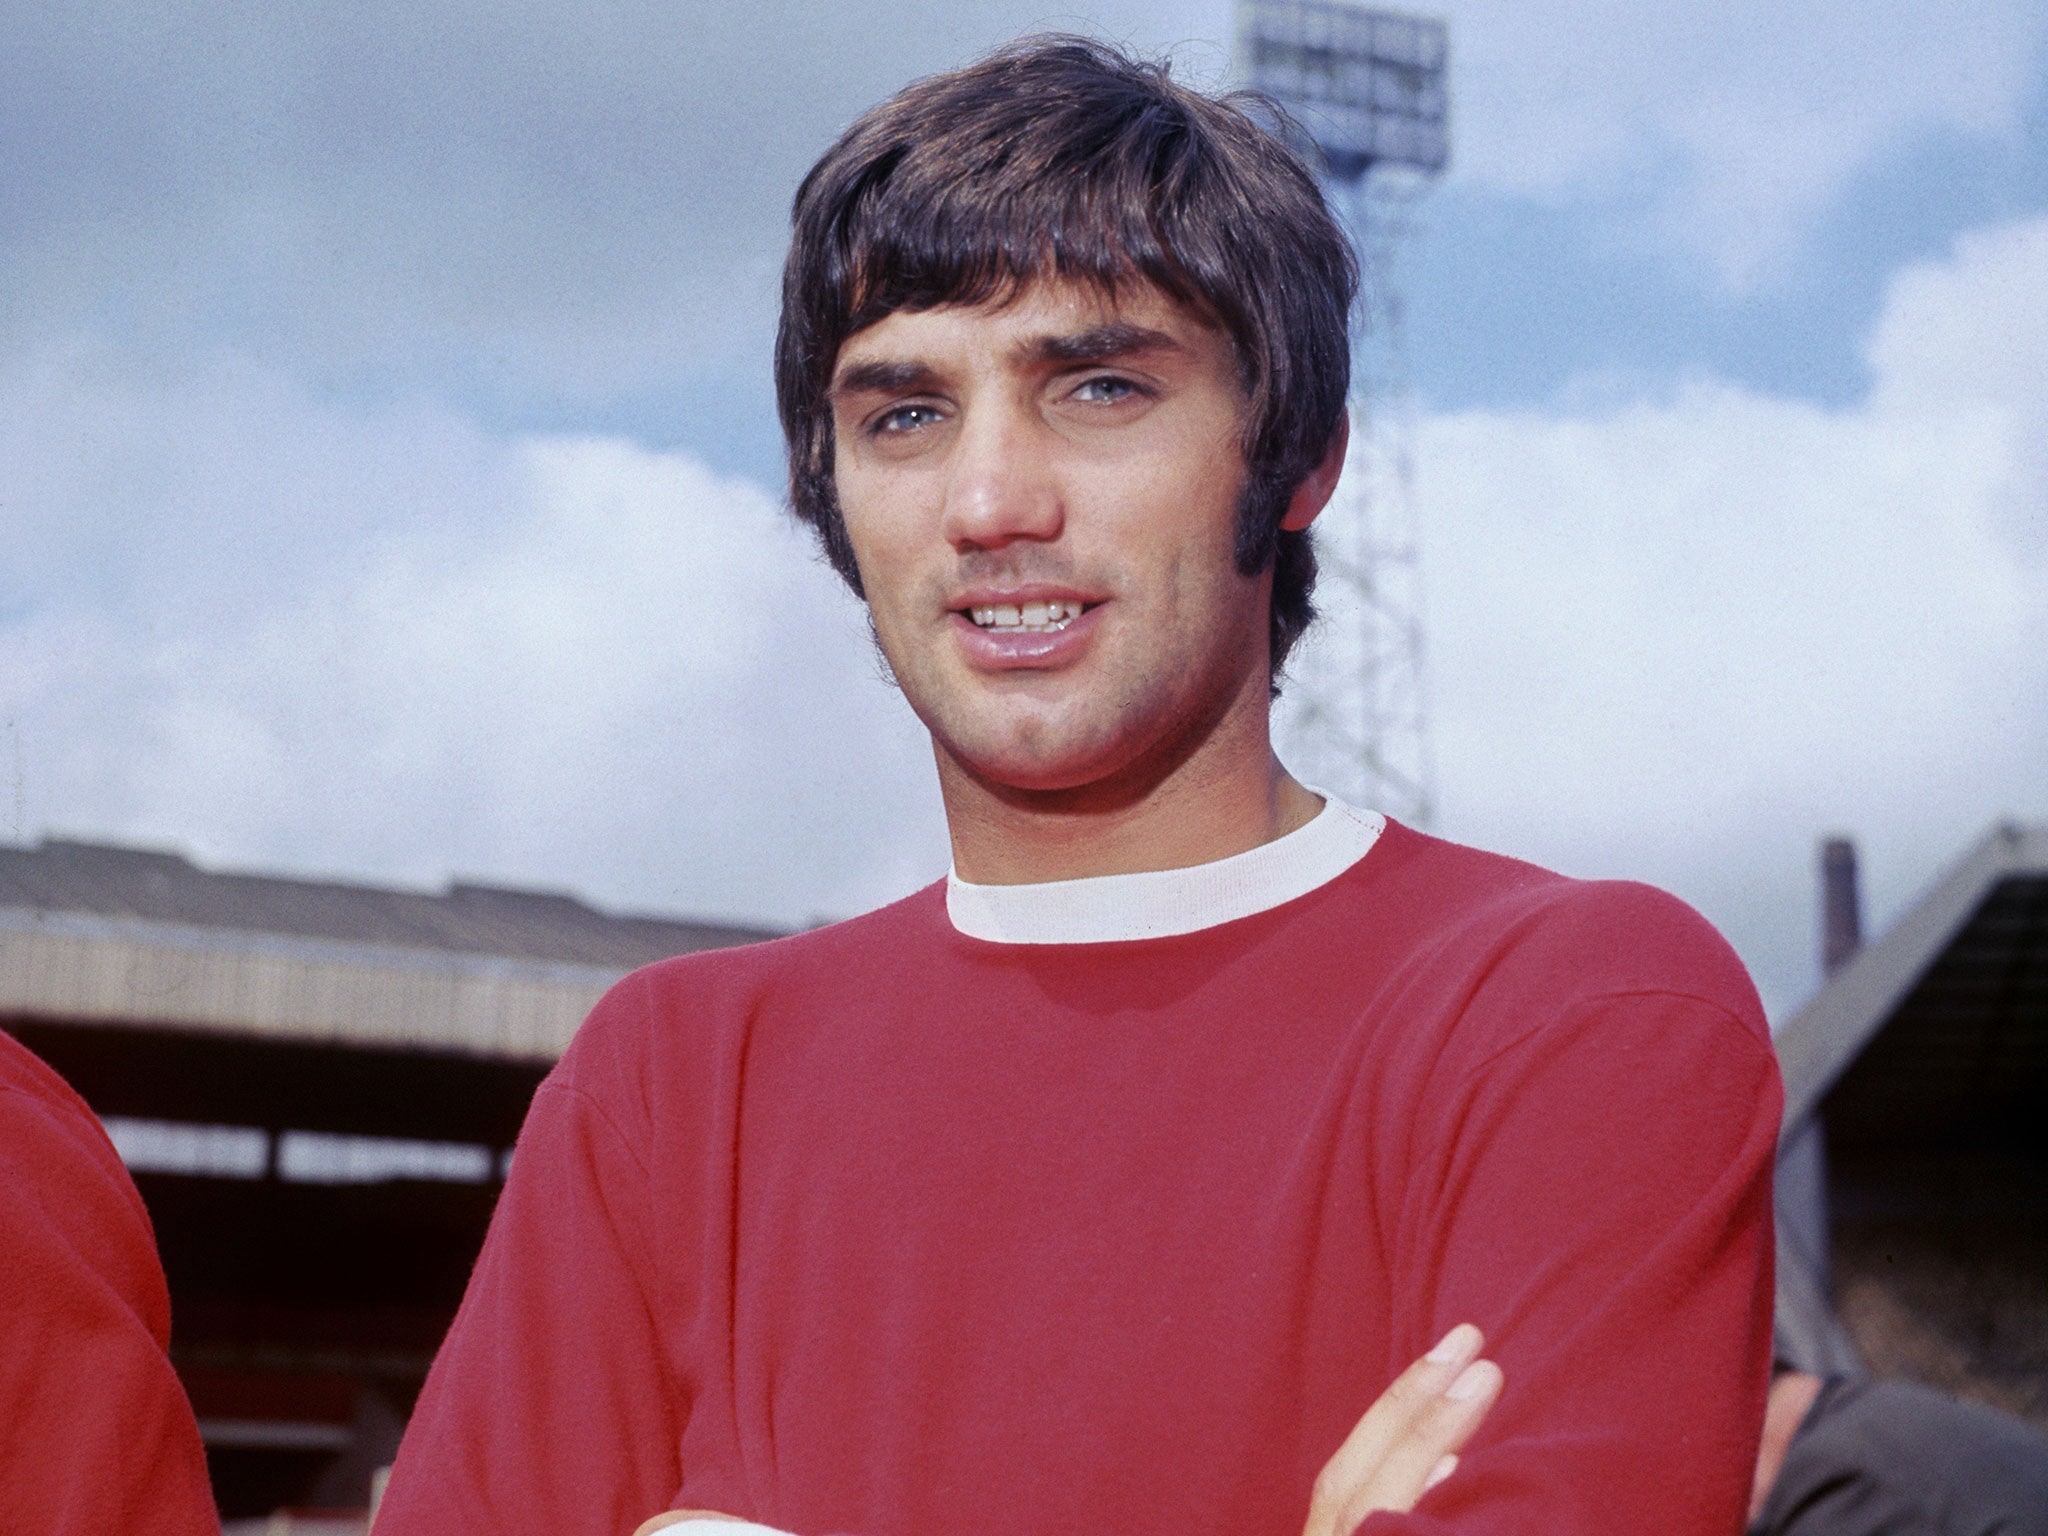 George Best brought life and joy to a team tinged with sadness